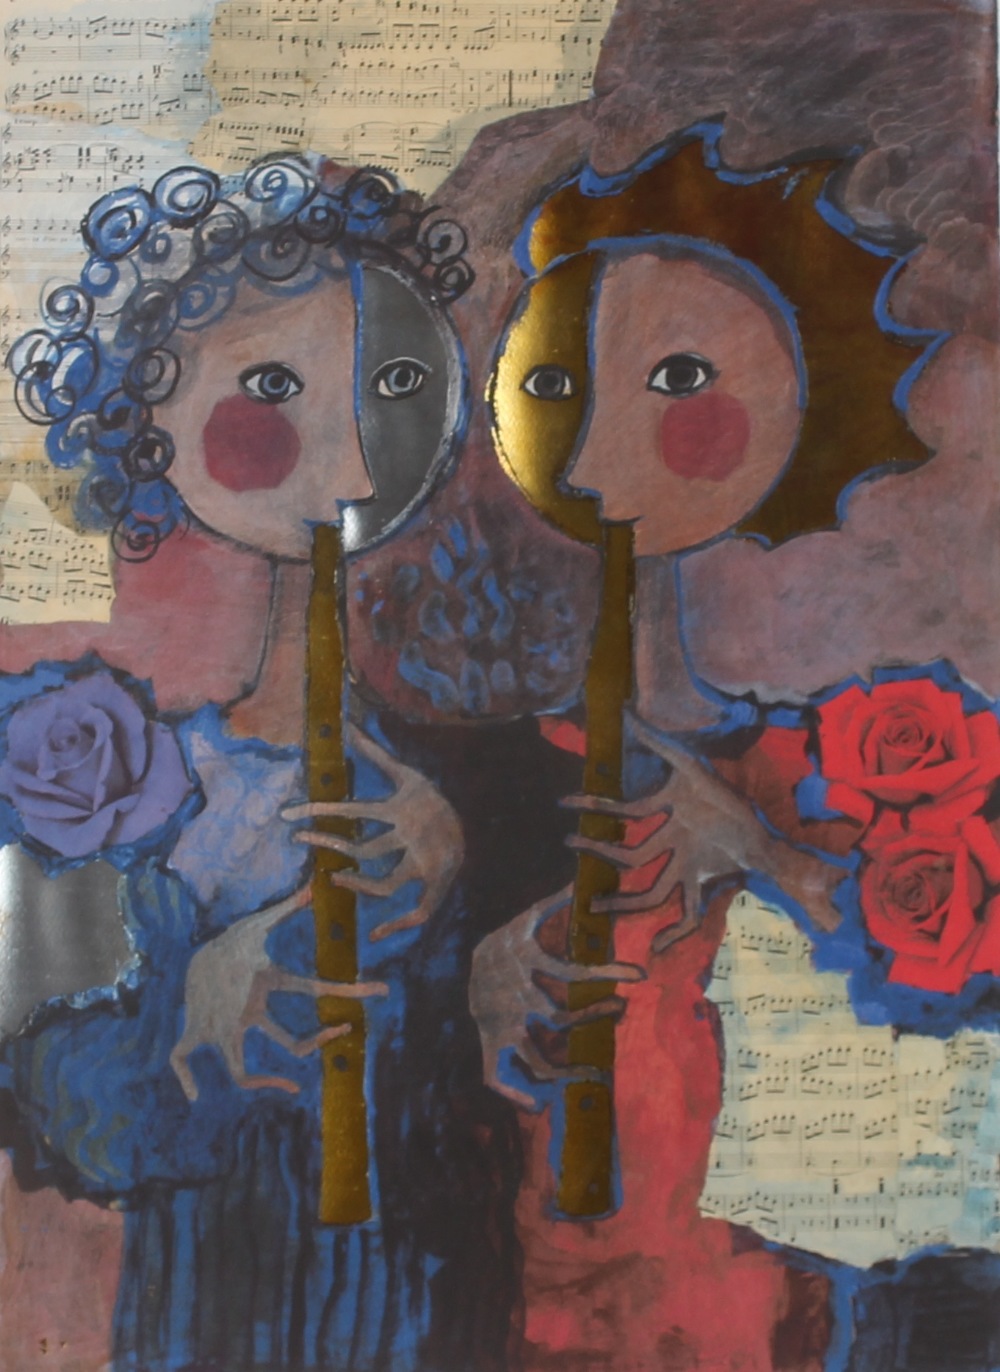 Rosina Wachtmeister, "Two Golden Flutes" signed limited edition print  541-995, plate 70cm x 50cm